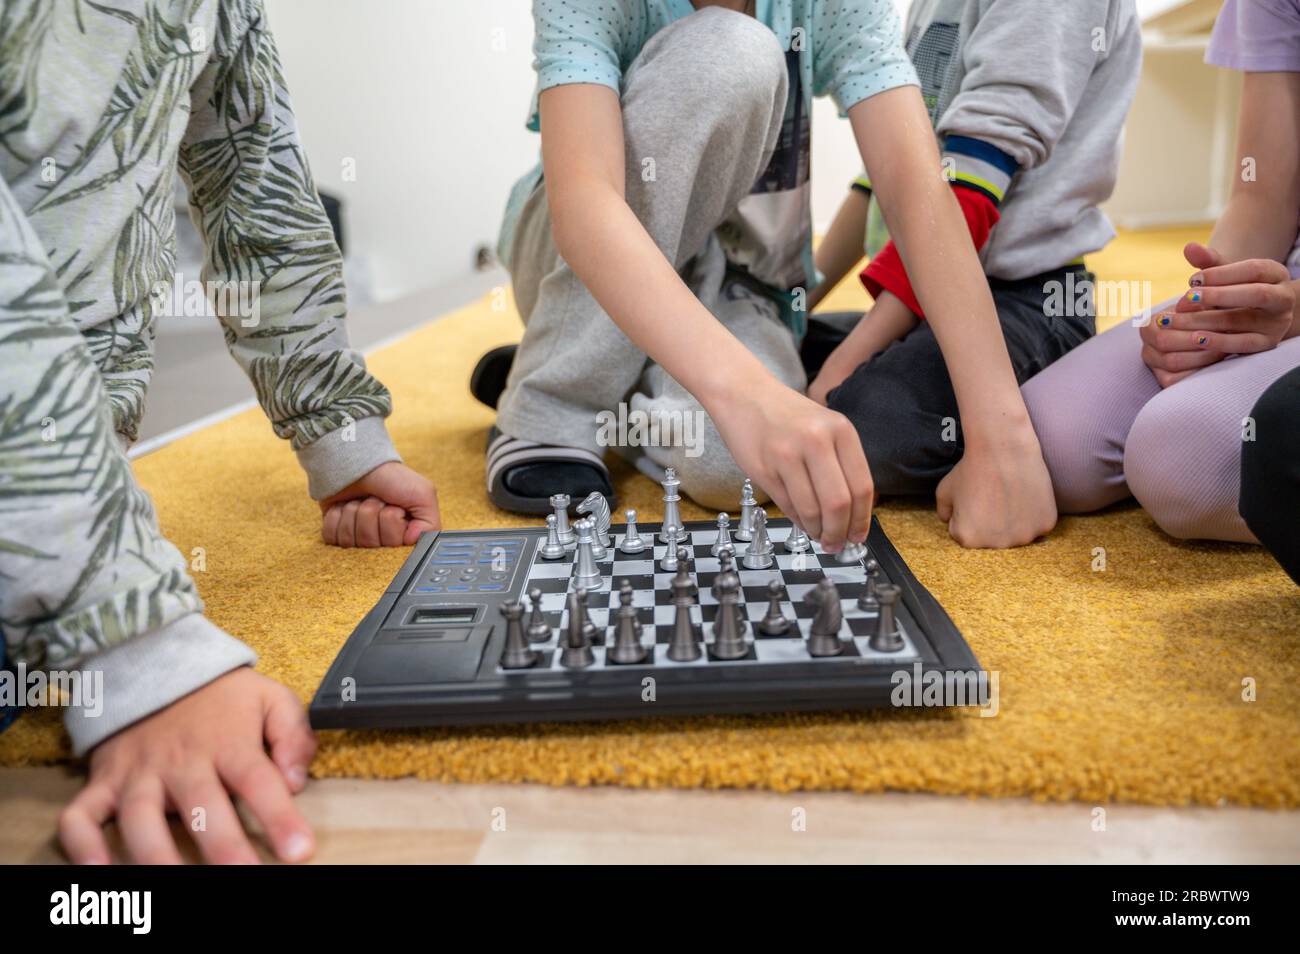 Children plays chess together with electronic board sitting on floor. No faces, unrecognizable persons Stock Photo